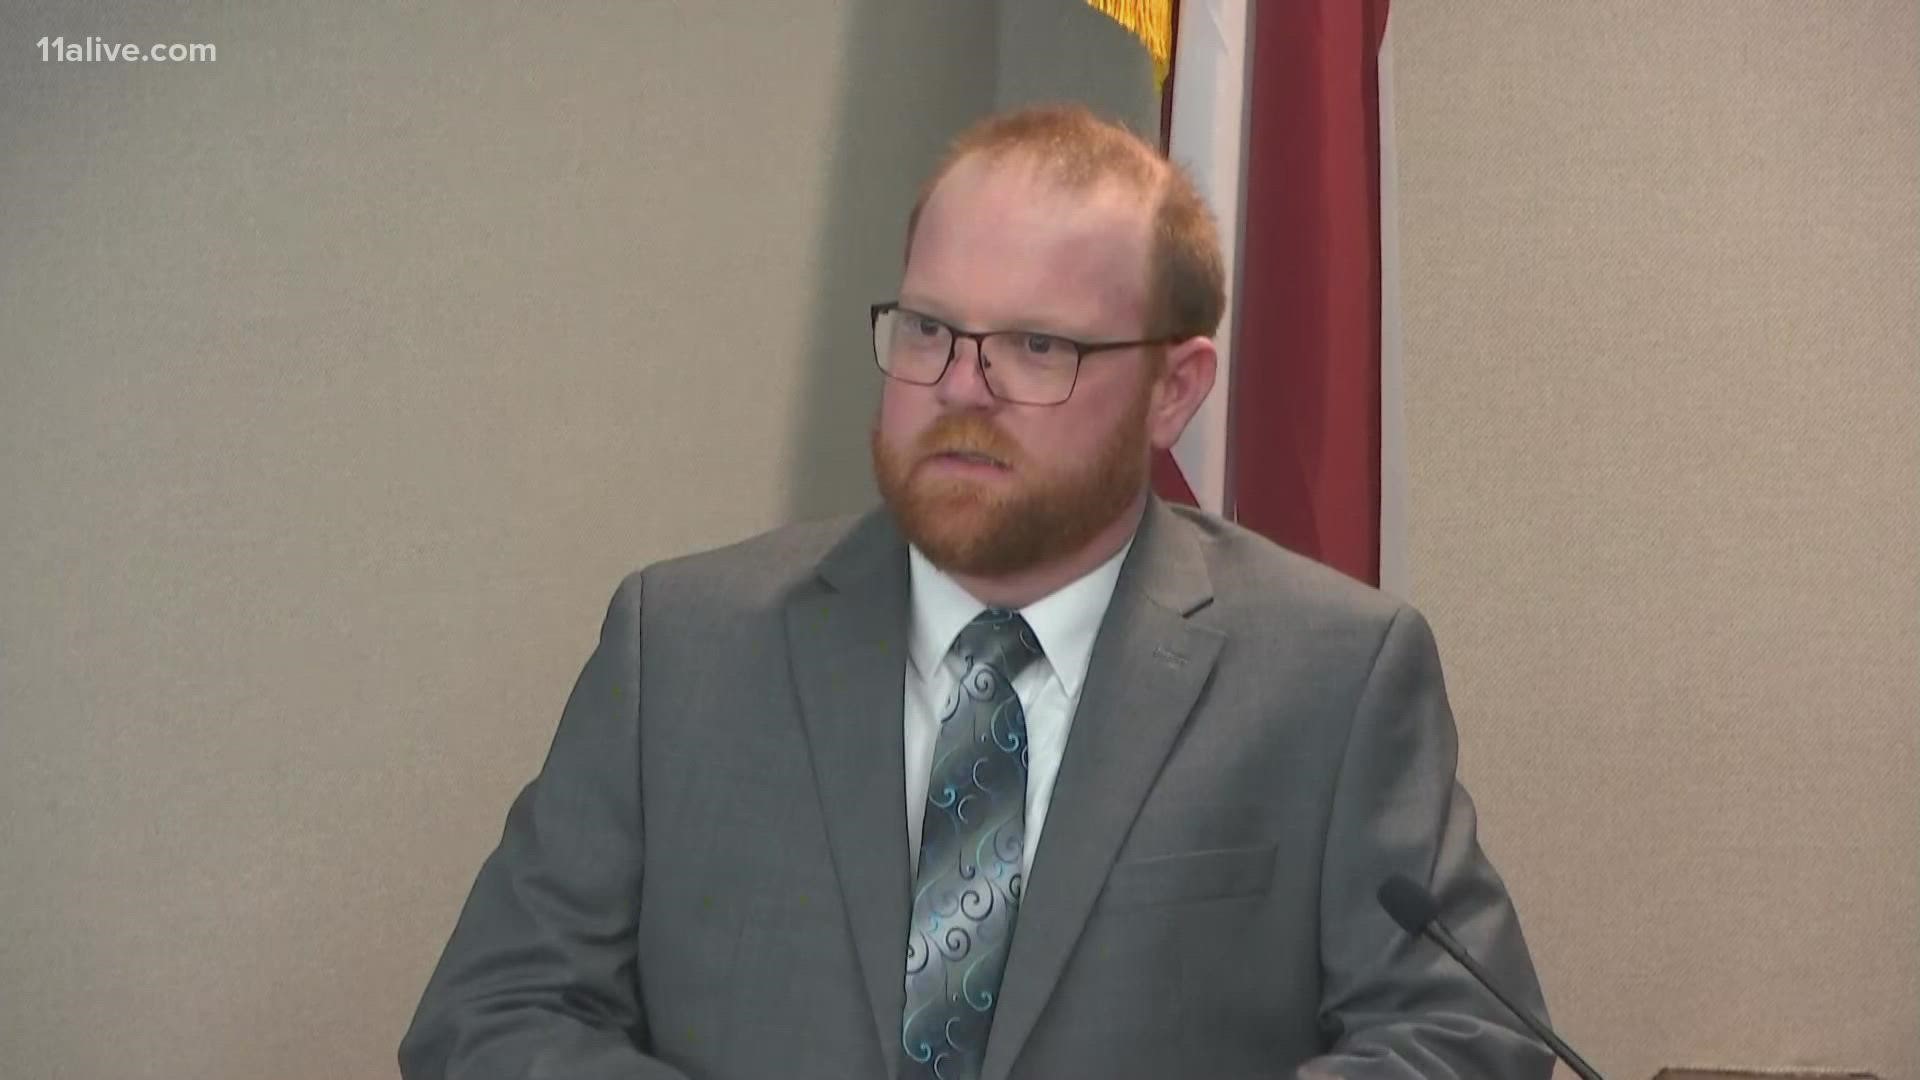 Travis McMichael takes the stand to testify in the death of Ahmaud Arbery murder trial. He said that he wanted to give his side of the story on Nov. 17, 2021.